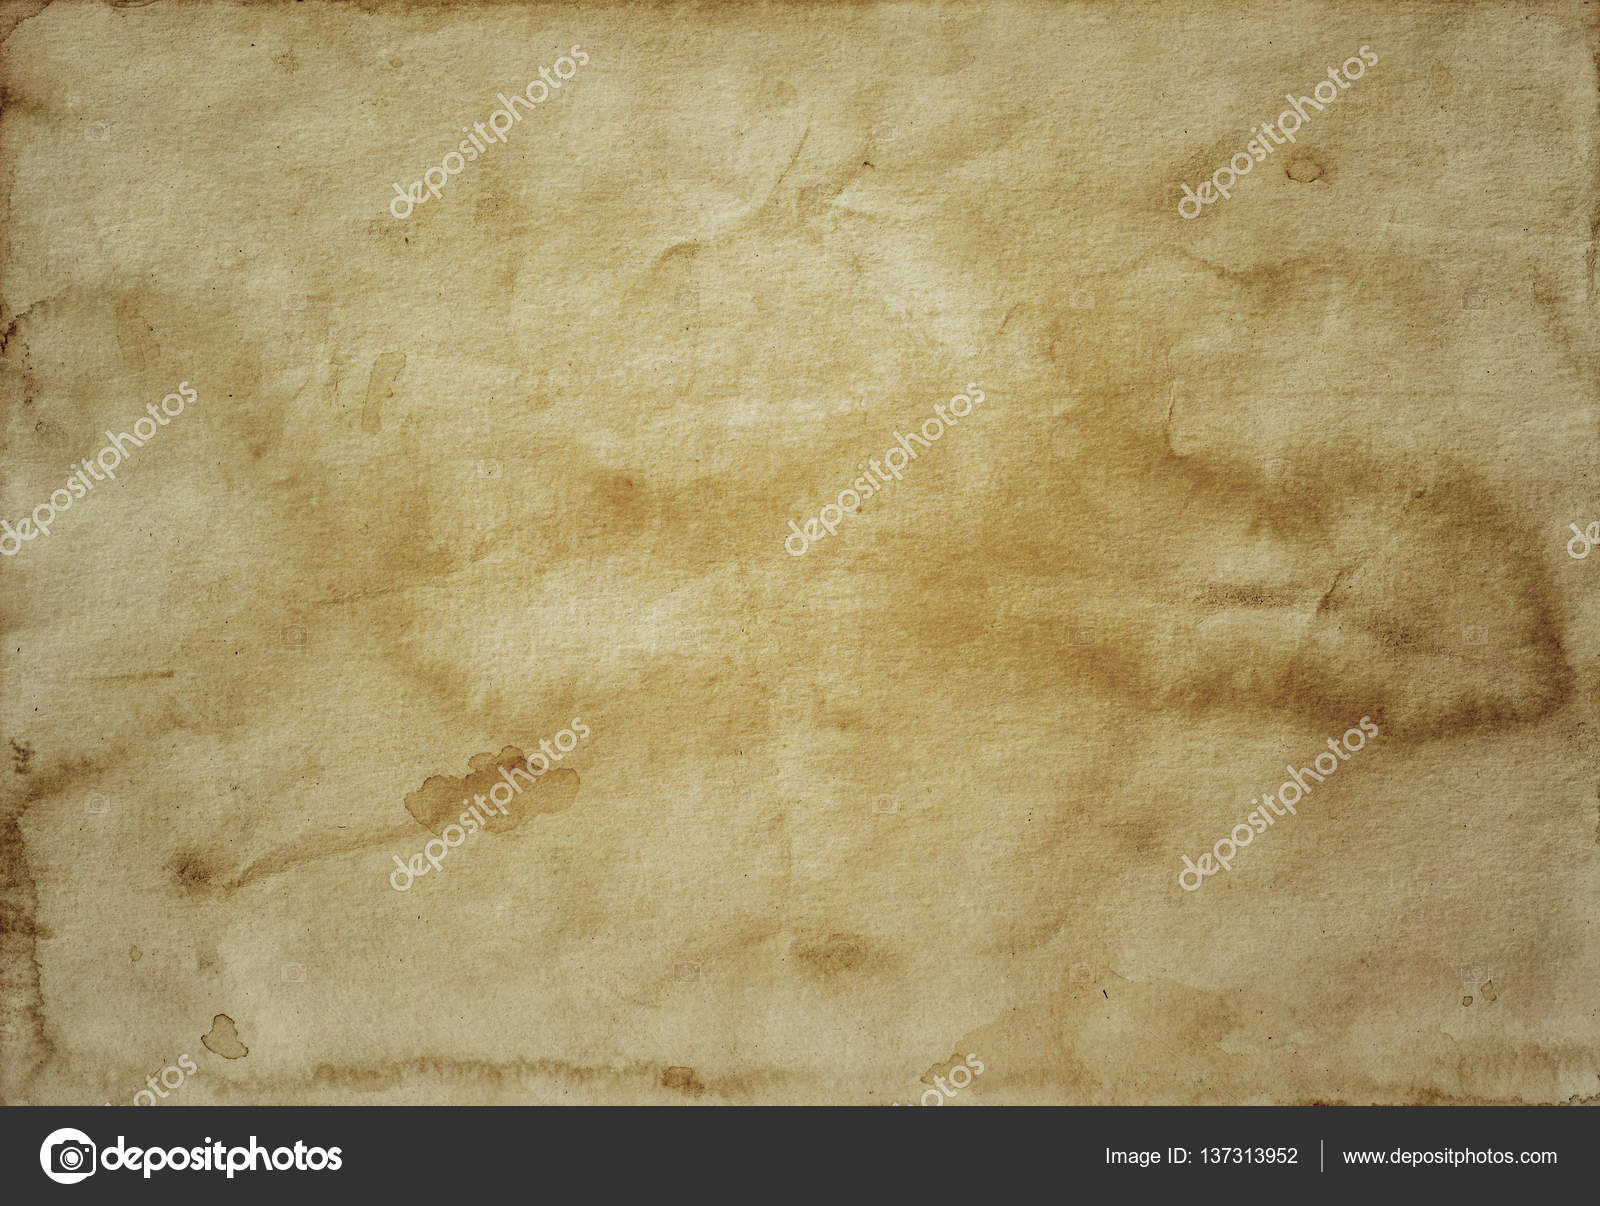 Old dirty paper texture. — Stock Photo © me67kz #137313952